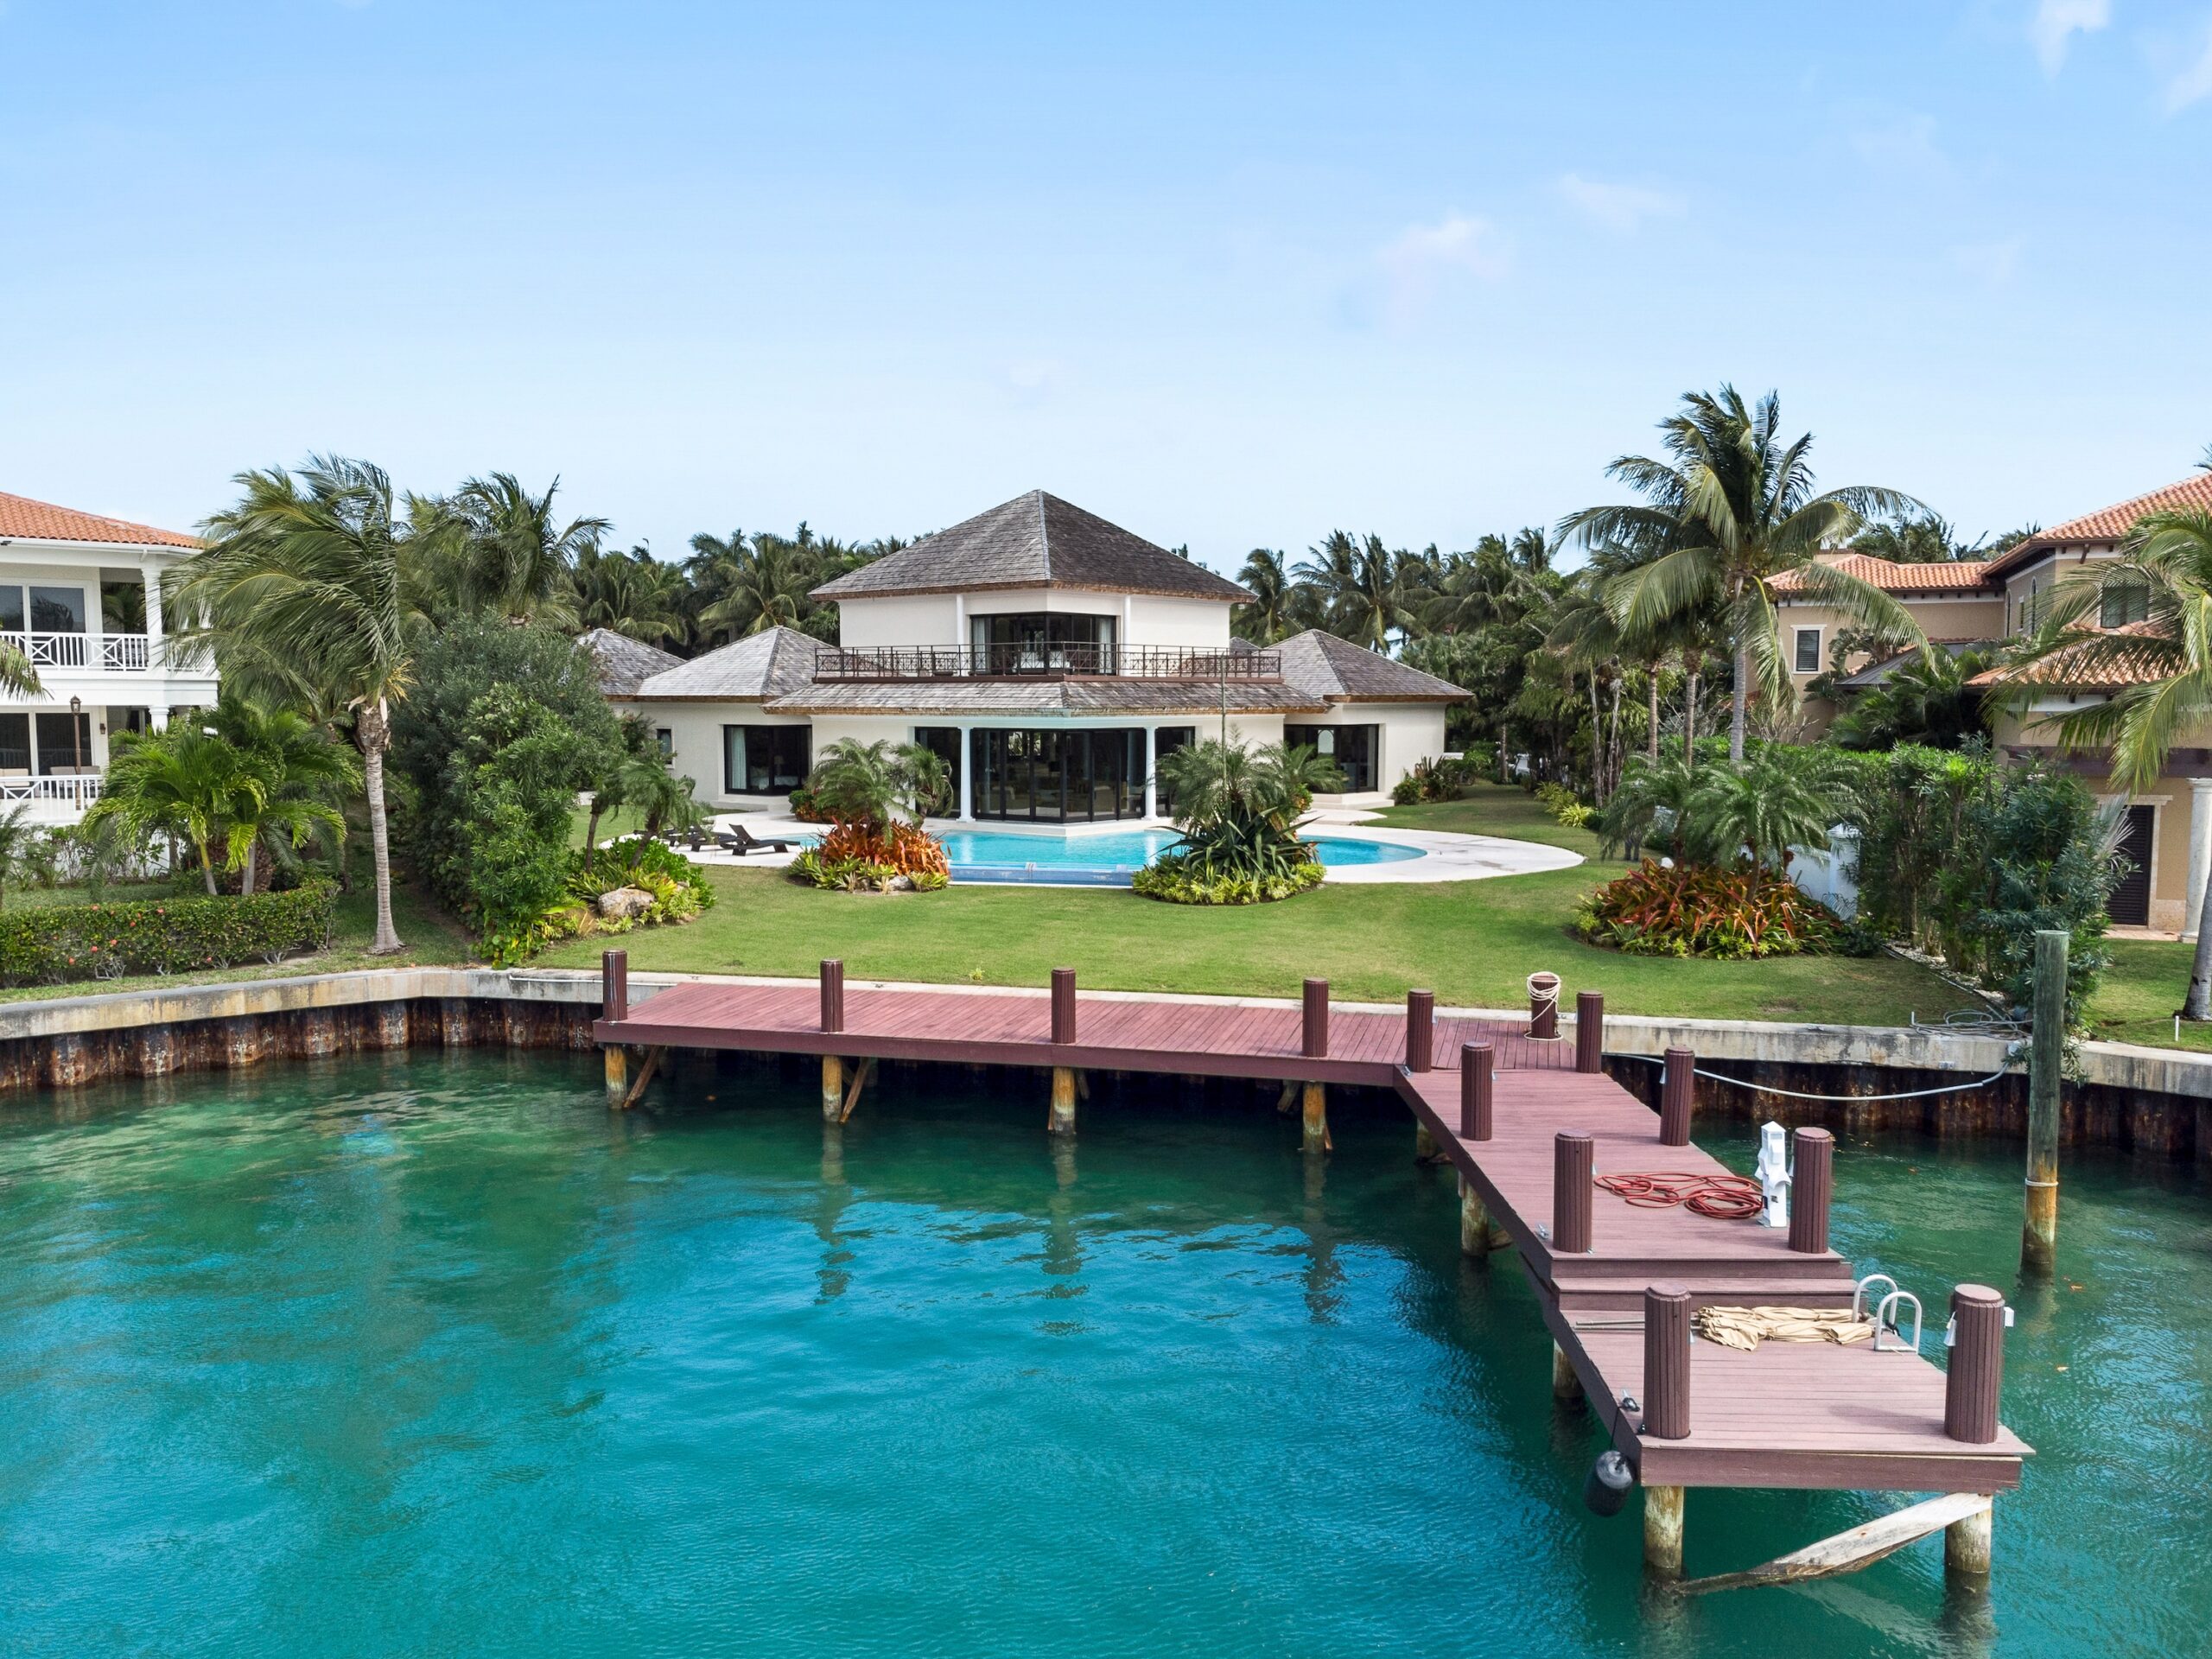 A house with a green yard, a pool, and a dock on the water.